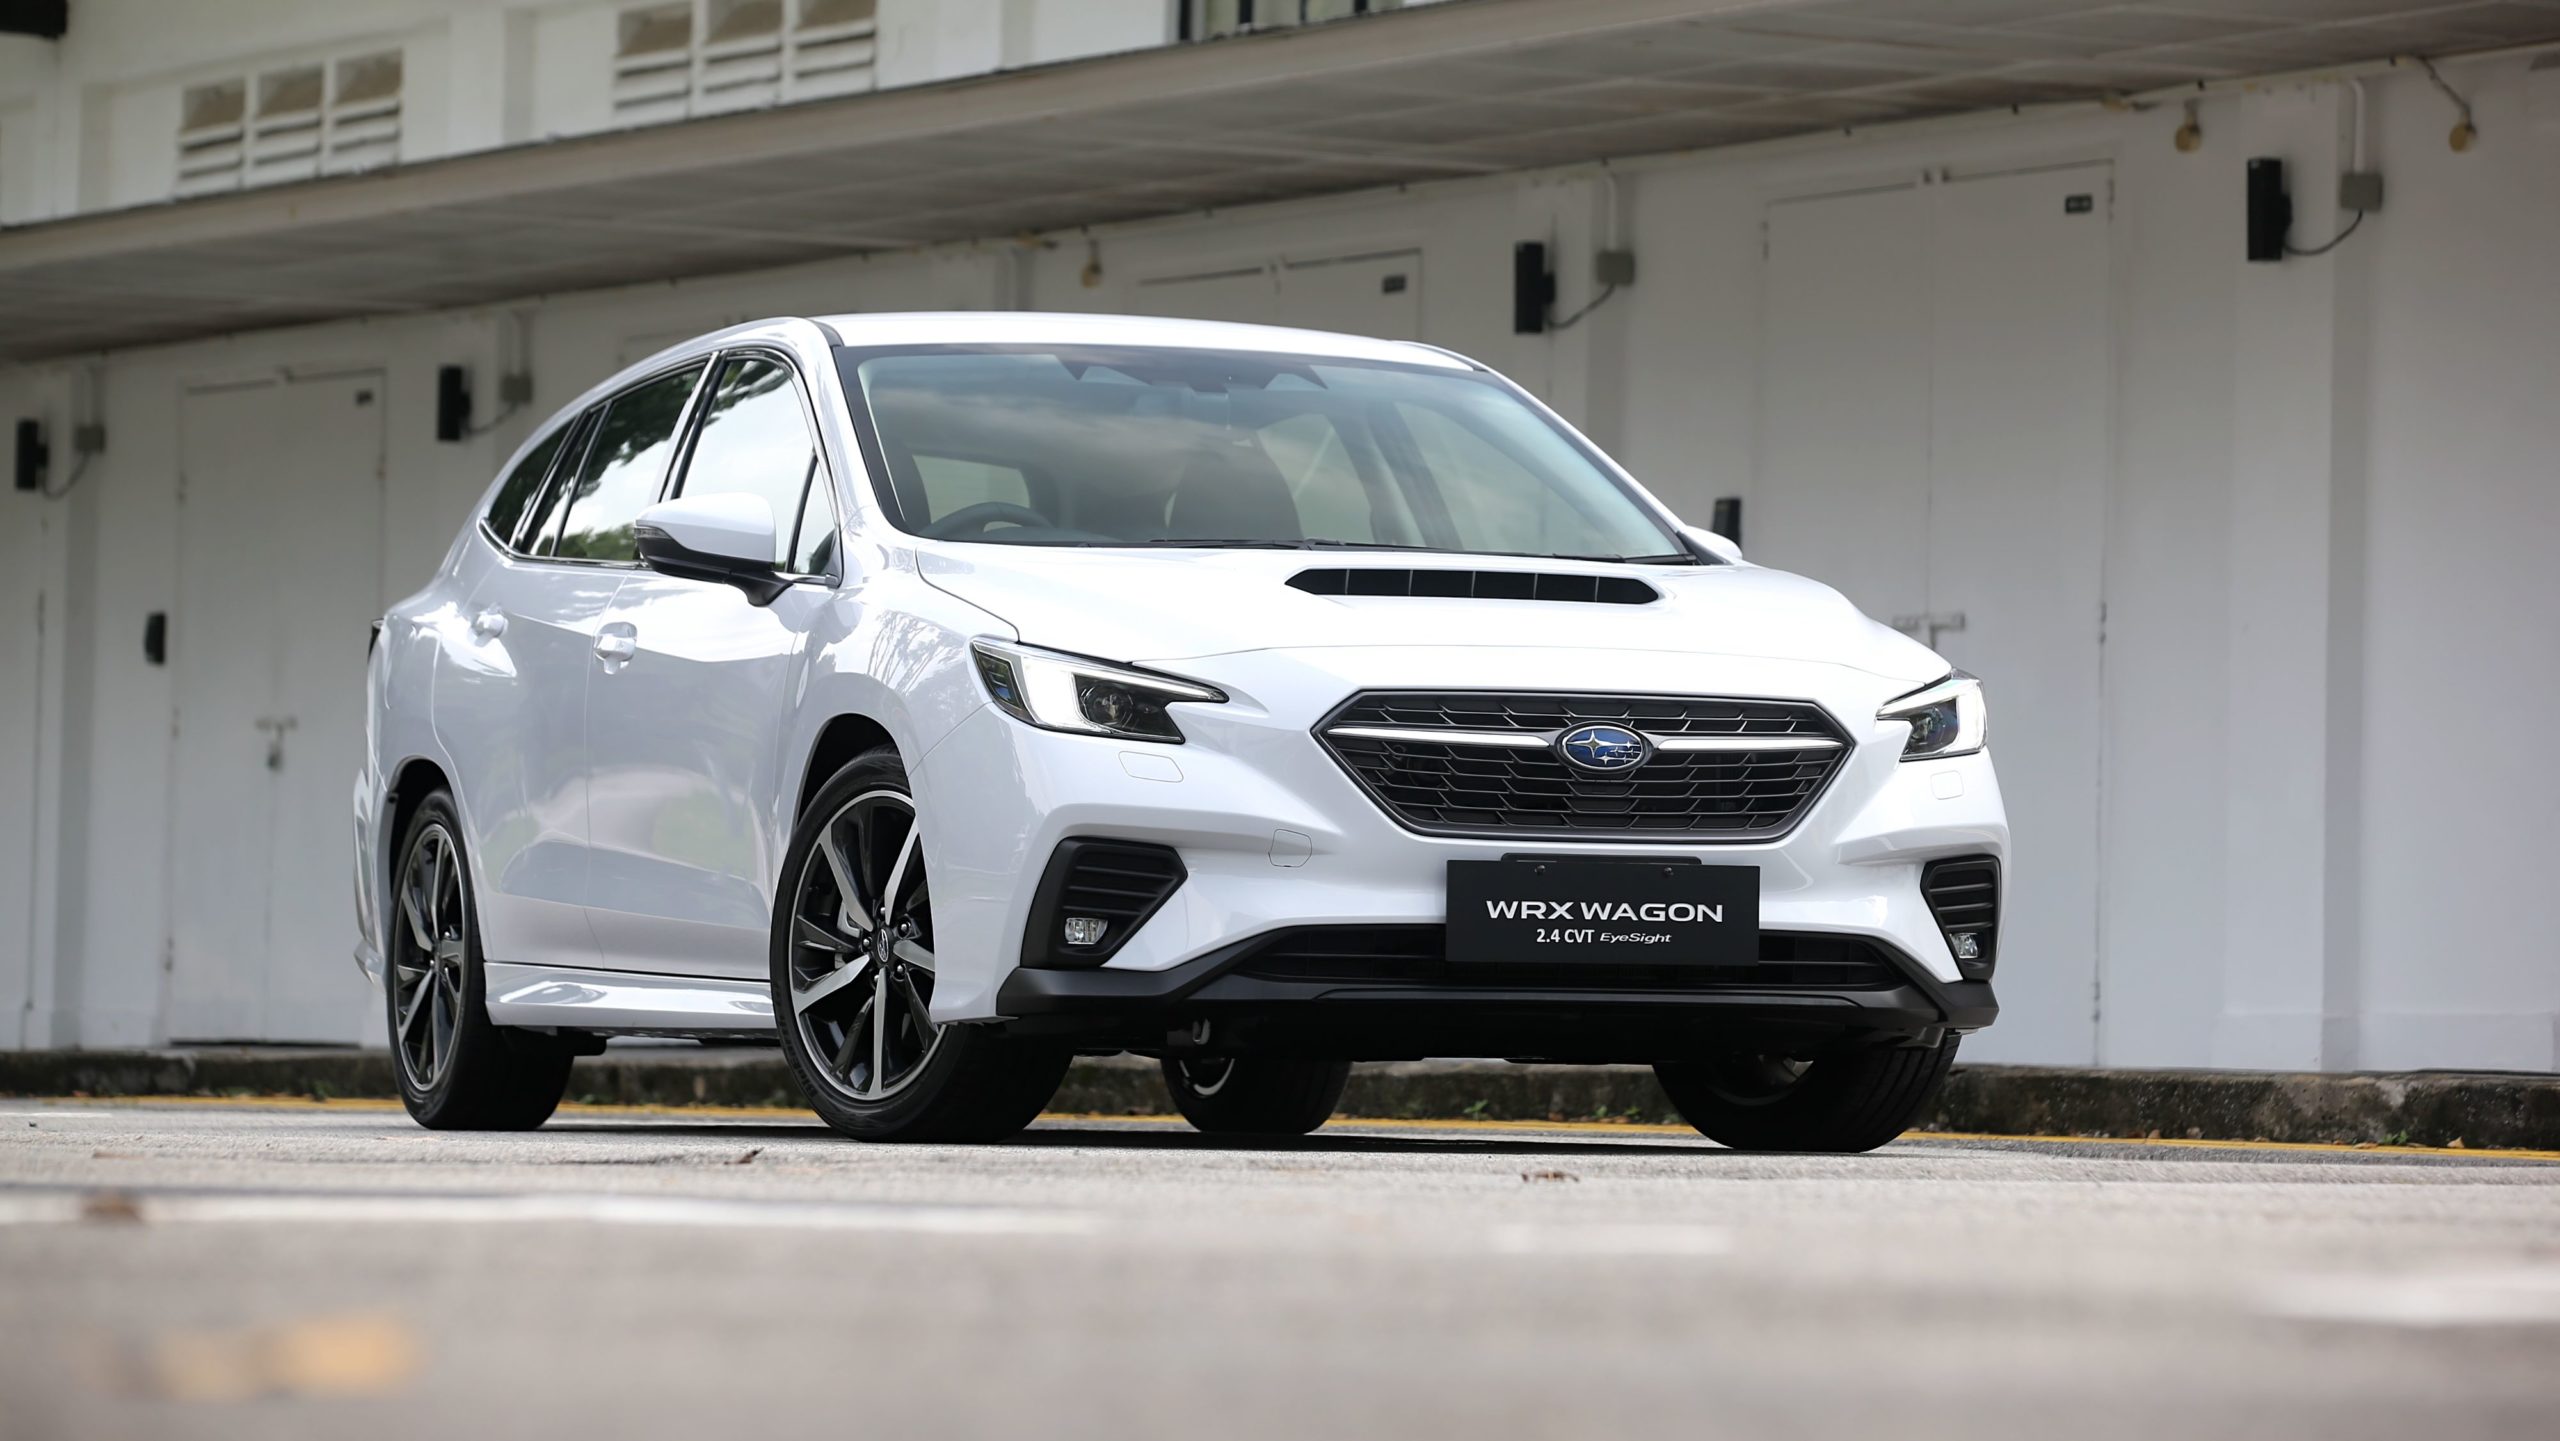 mreview: subaru wrx gt-s wagon 2.4 eyesight - what's in a name?